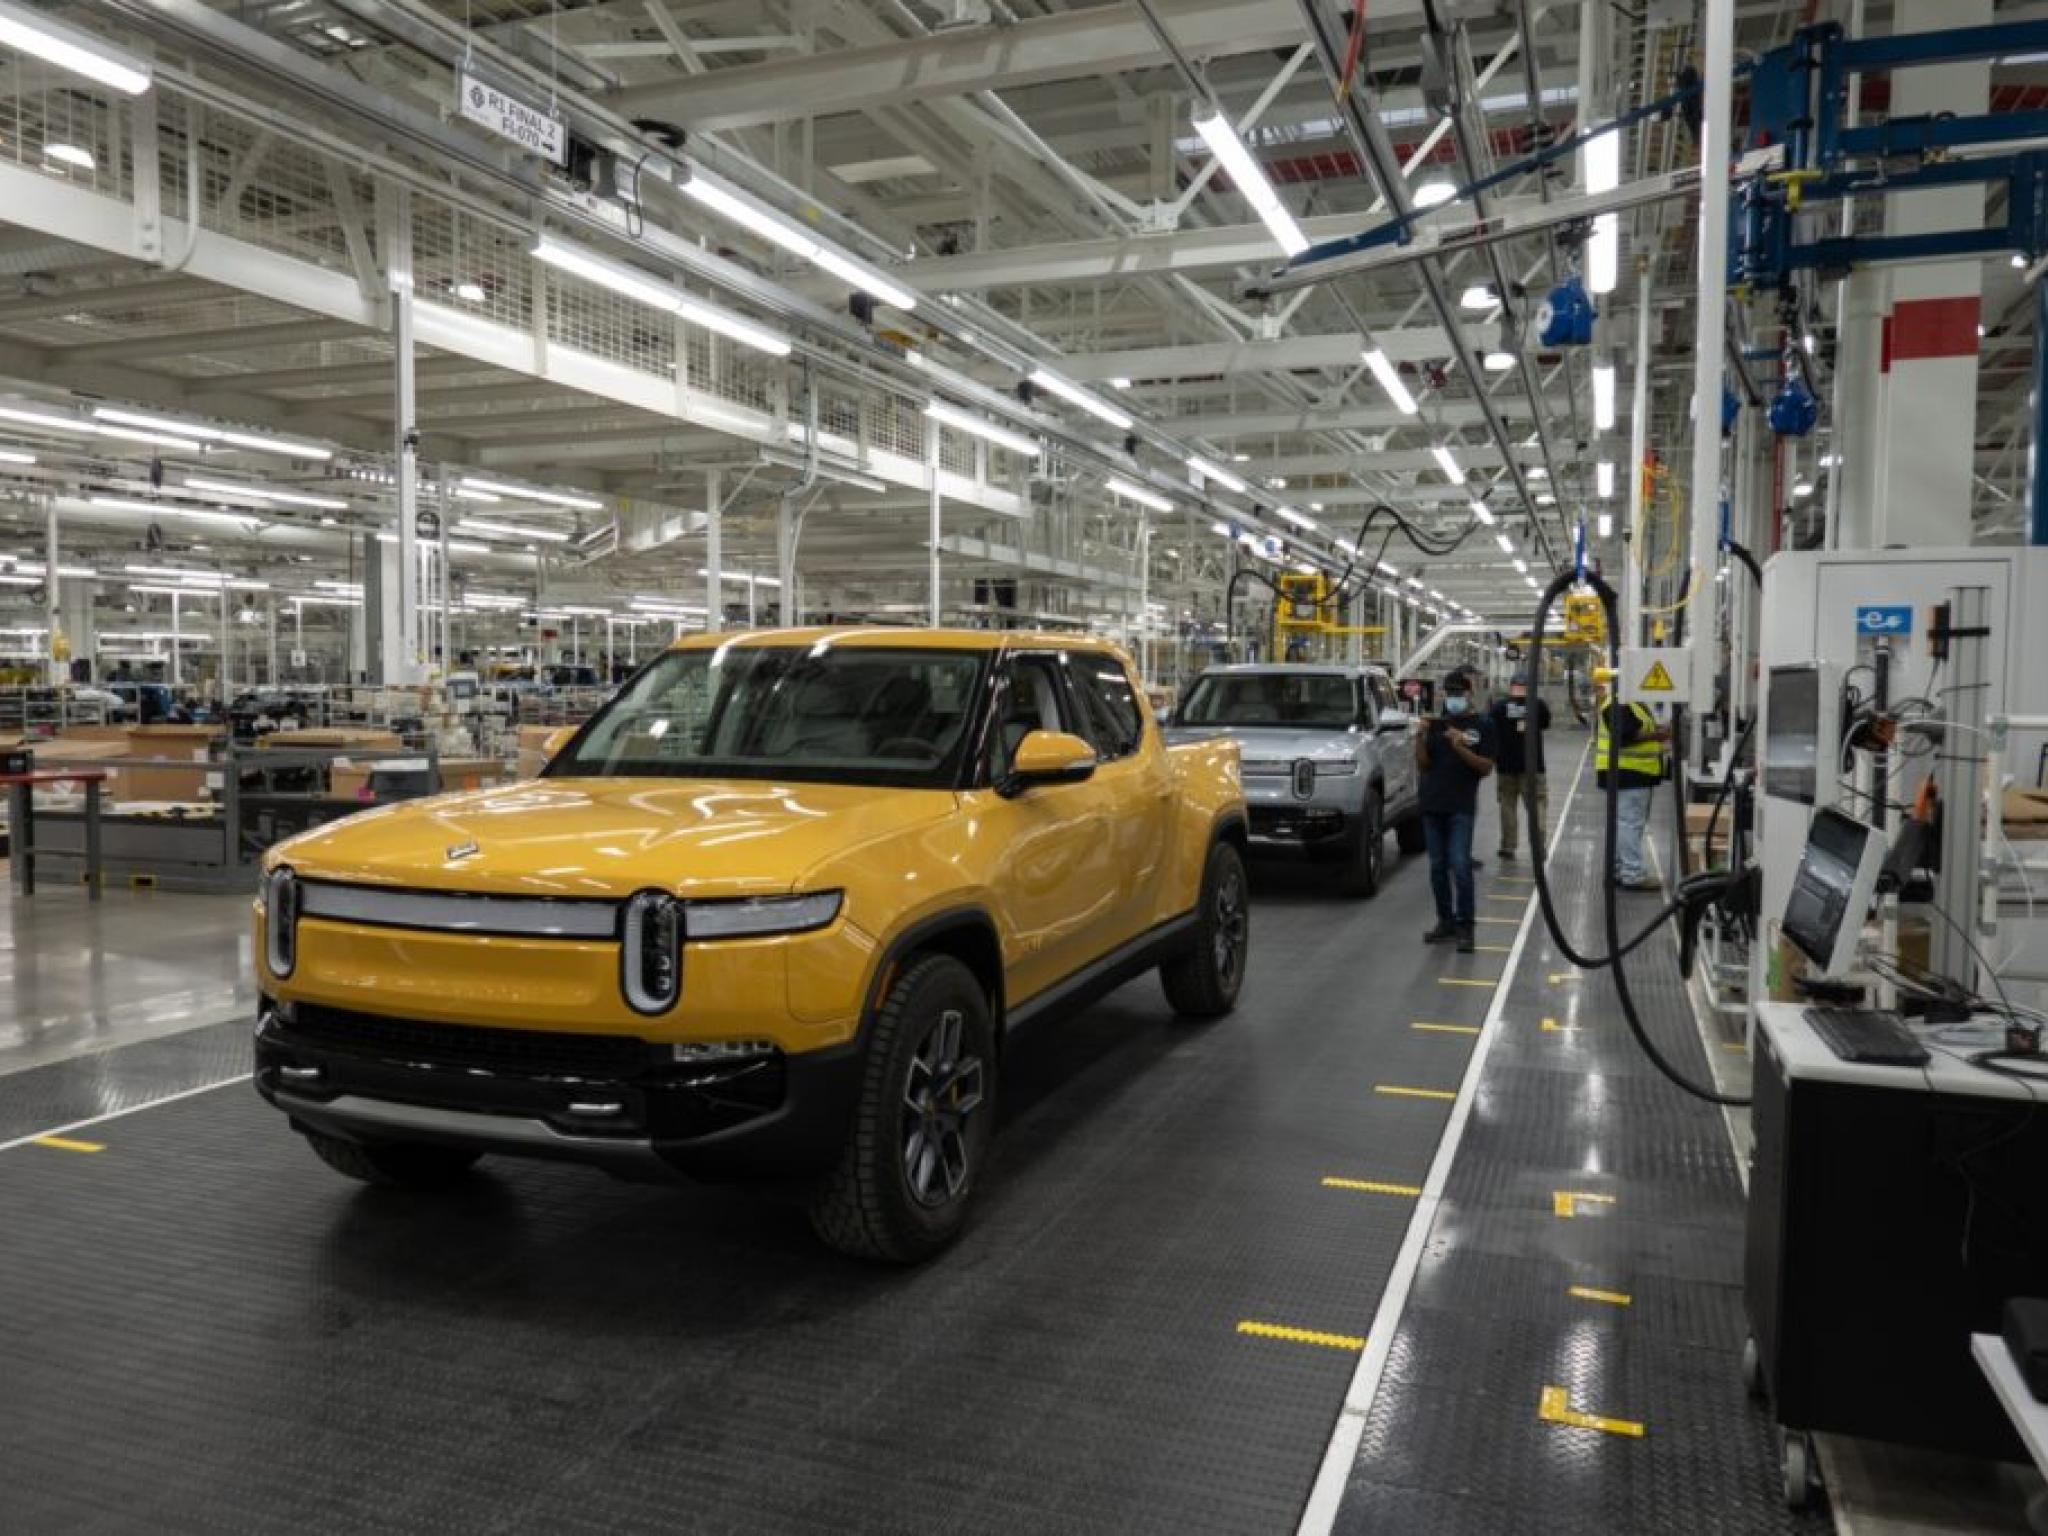  whats-going-on-with-rivian-automotive-shares-today 